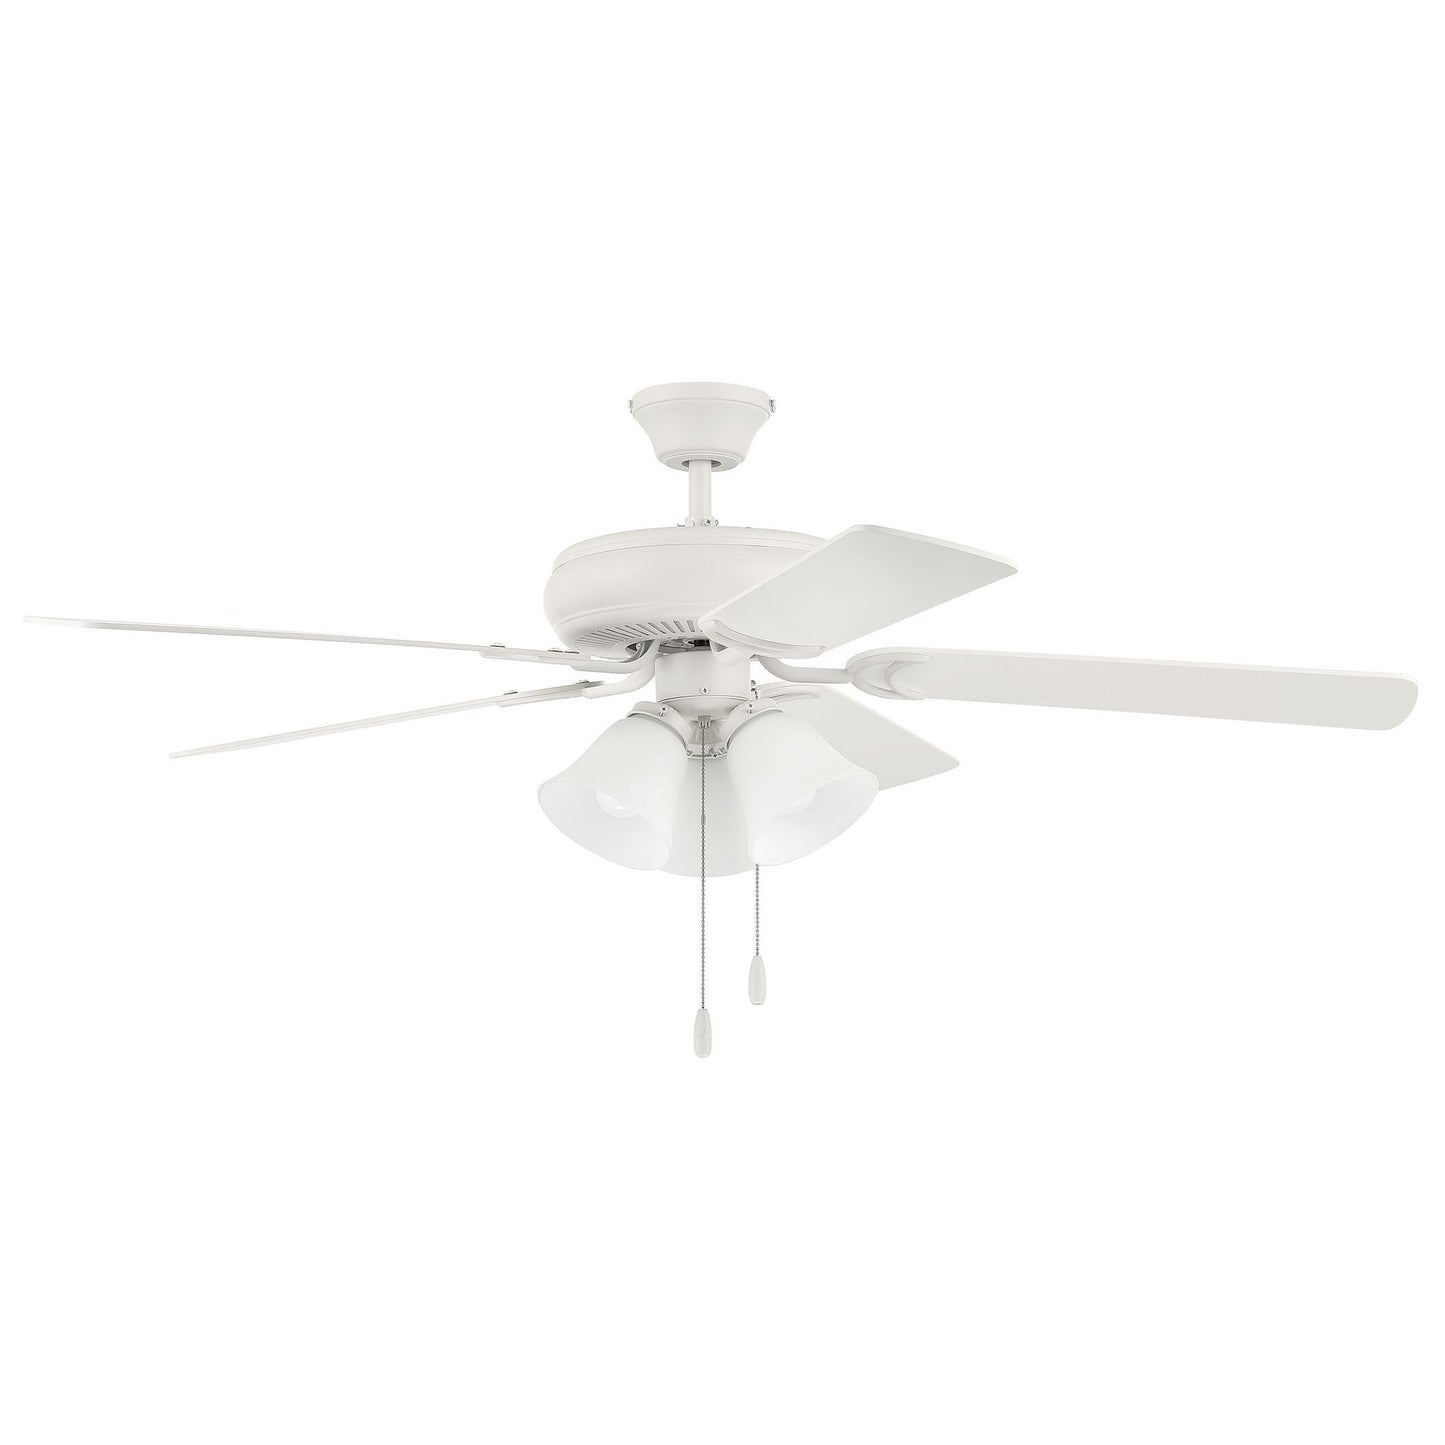 DCF52W5C3W - Decorator's Choice 52" 5 Blade Ceiling Fan with Light Kit - Pull Chain - Matte White